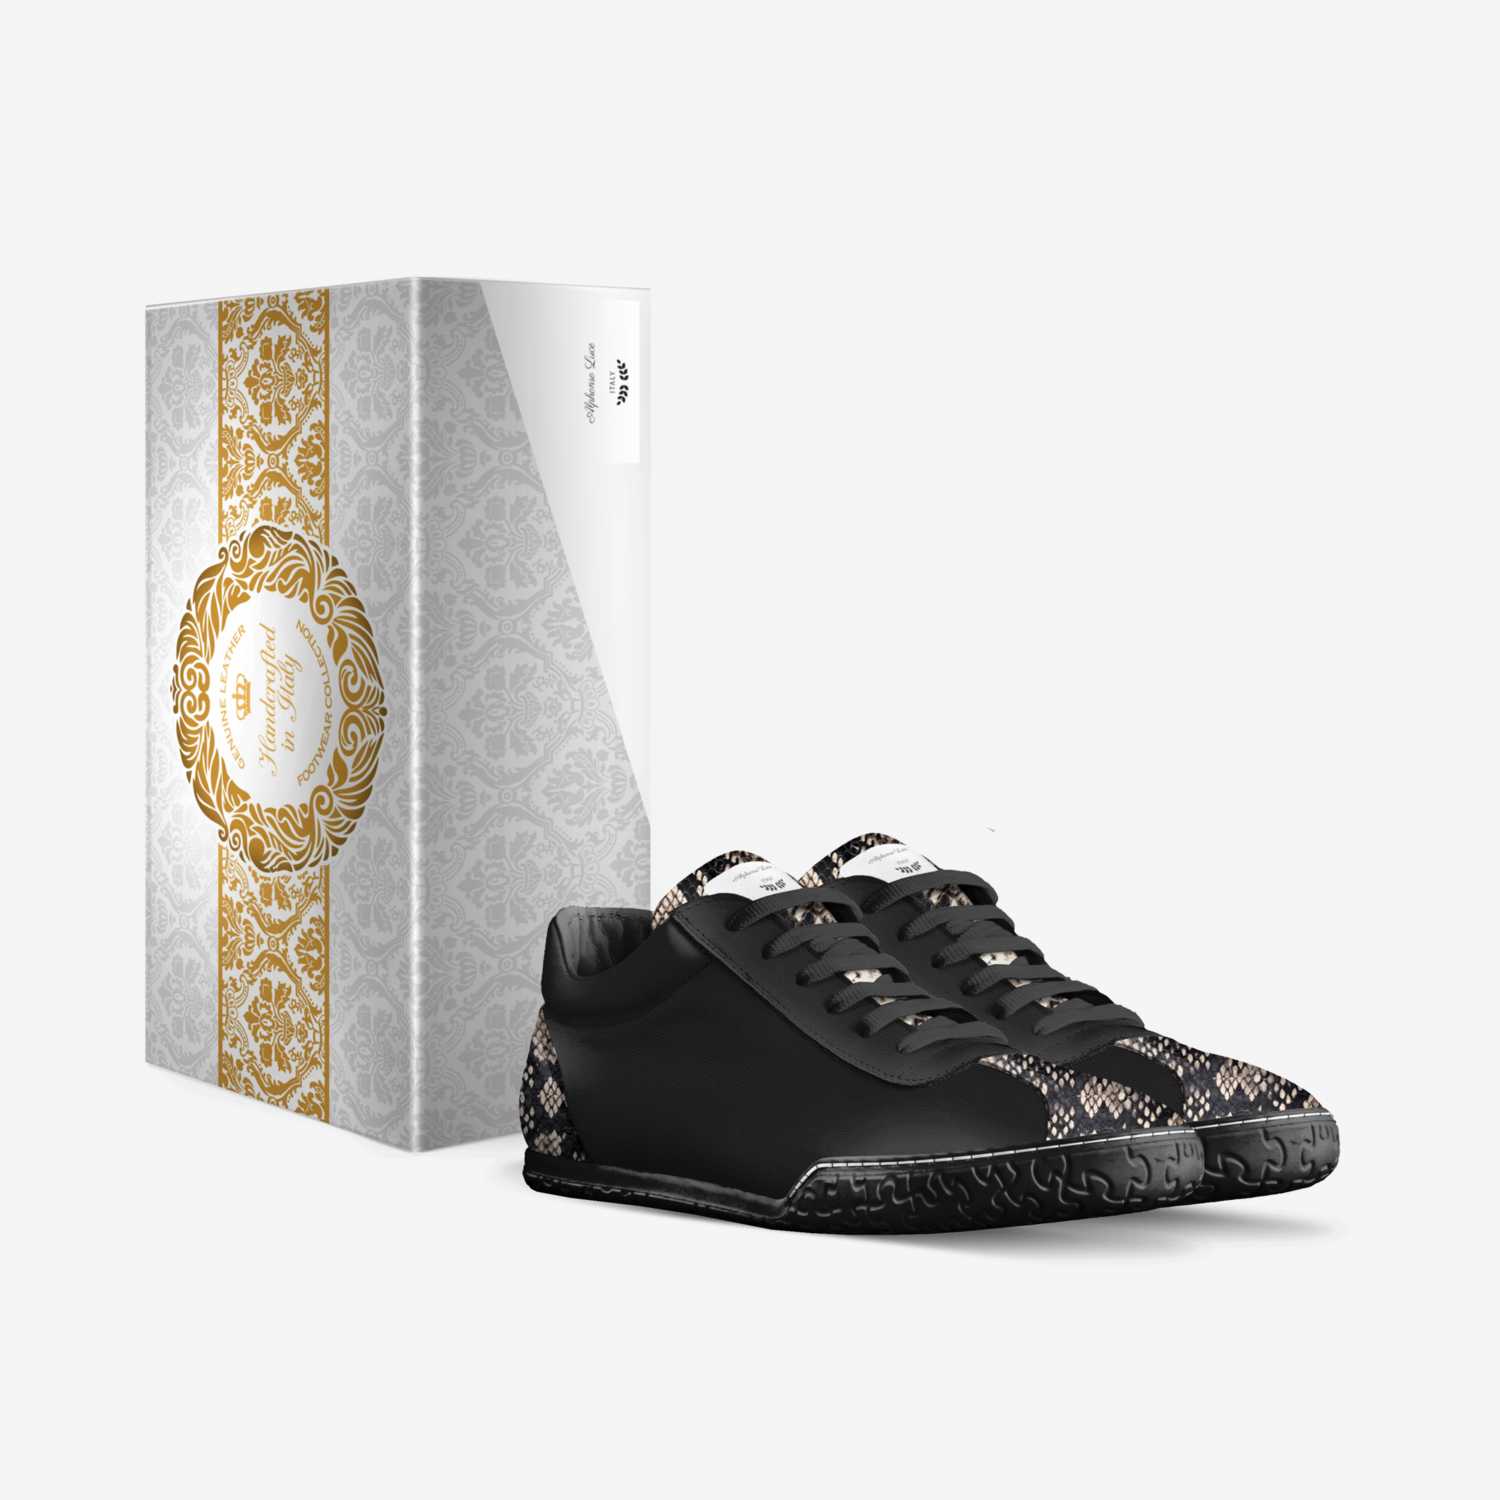 Alphonso Luce  custom made in Italy shoes by Jaumaal Beckford | Box view